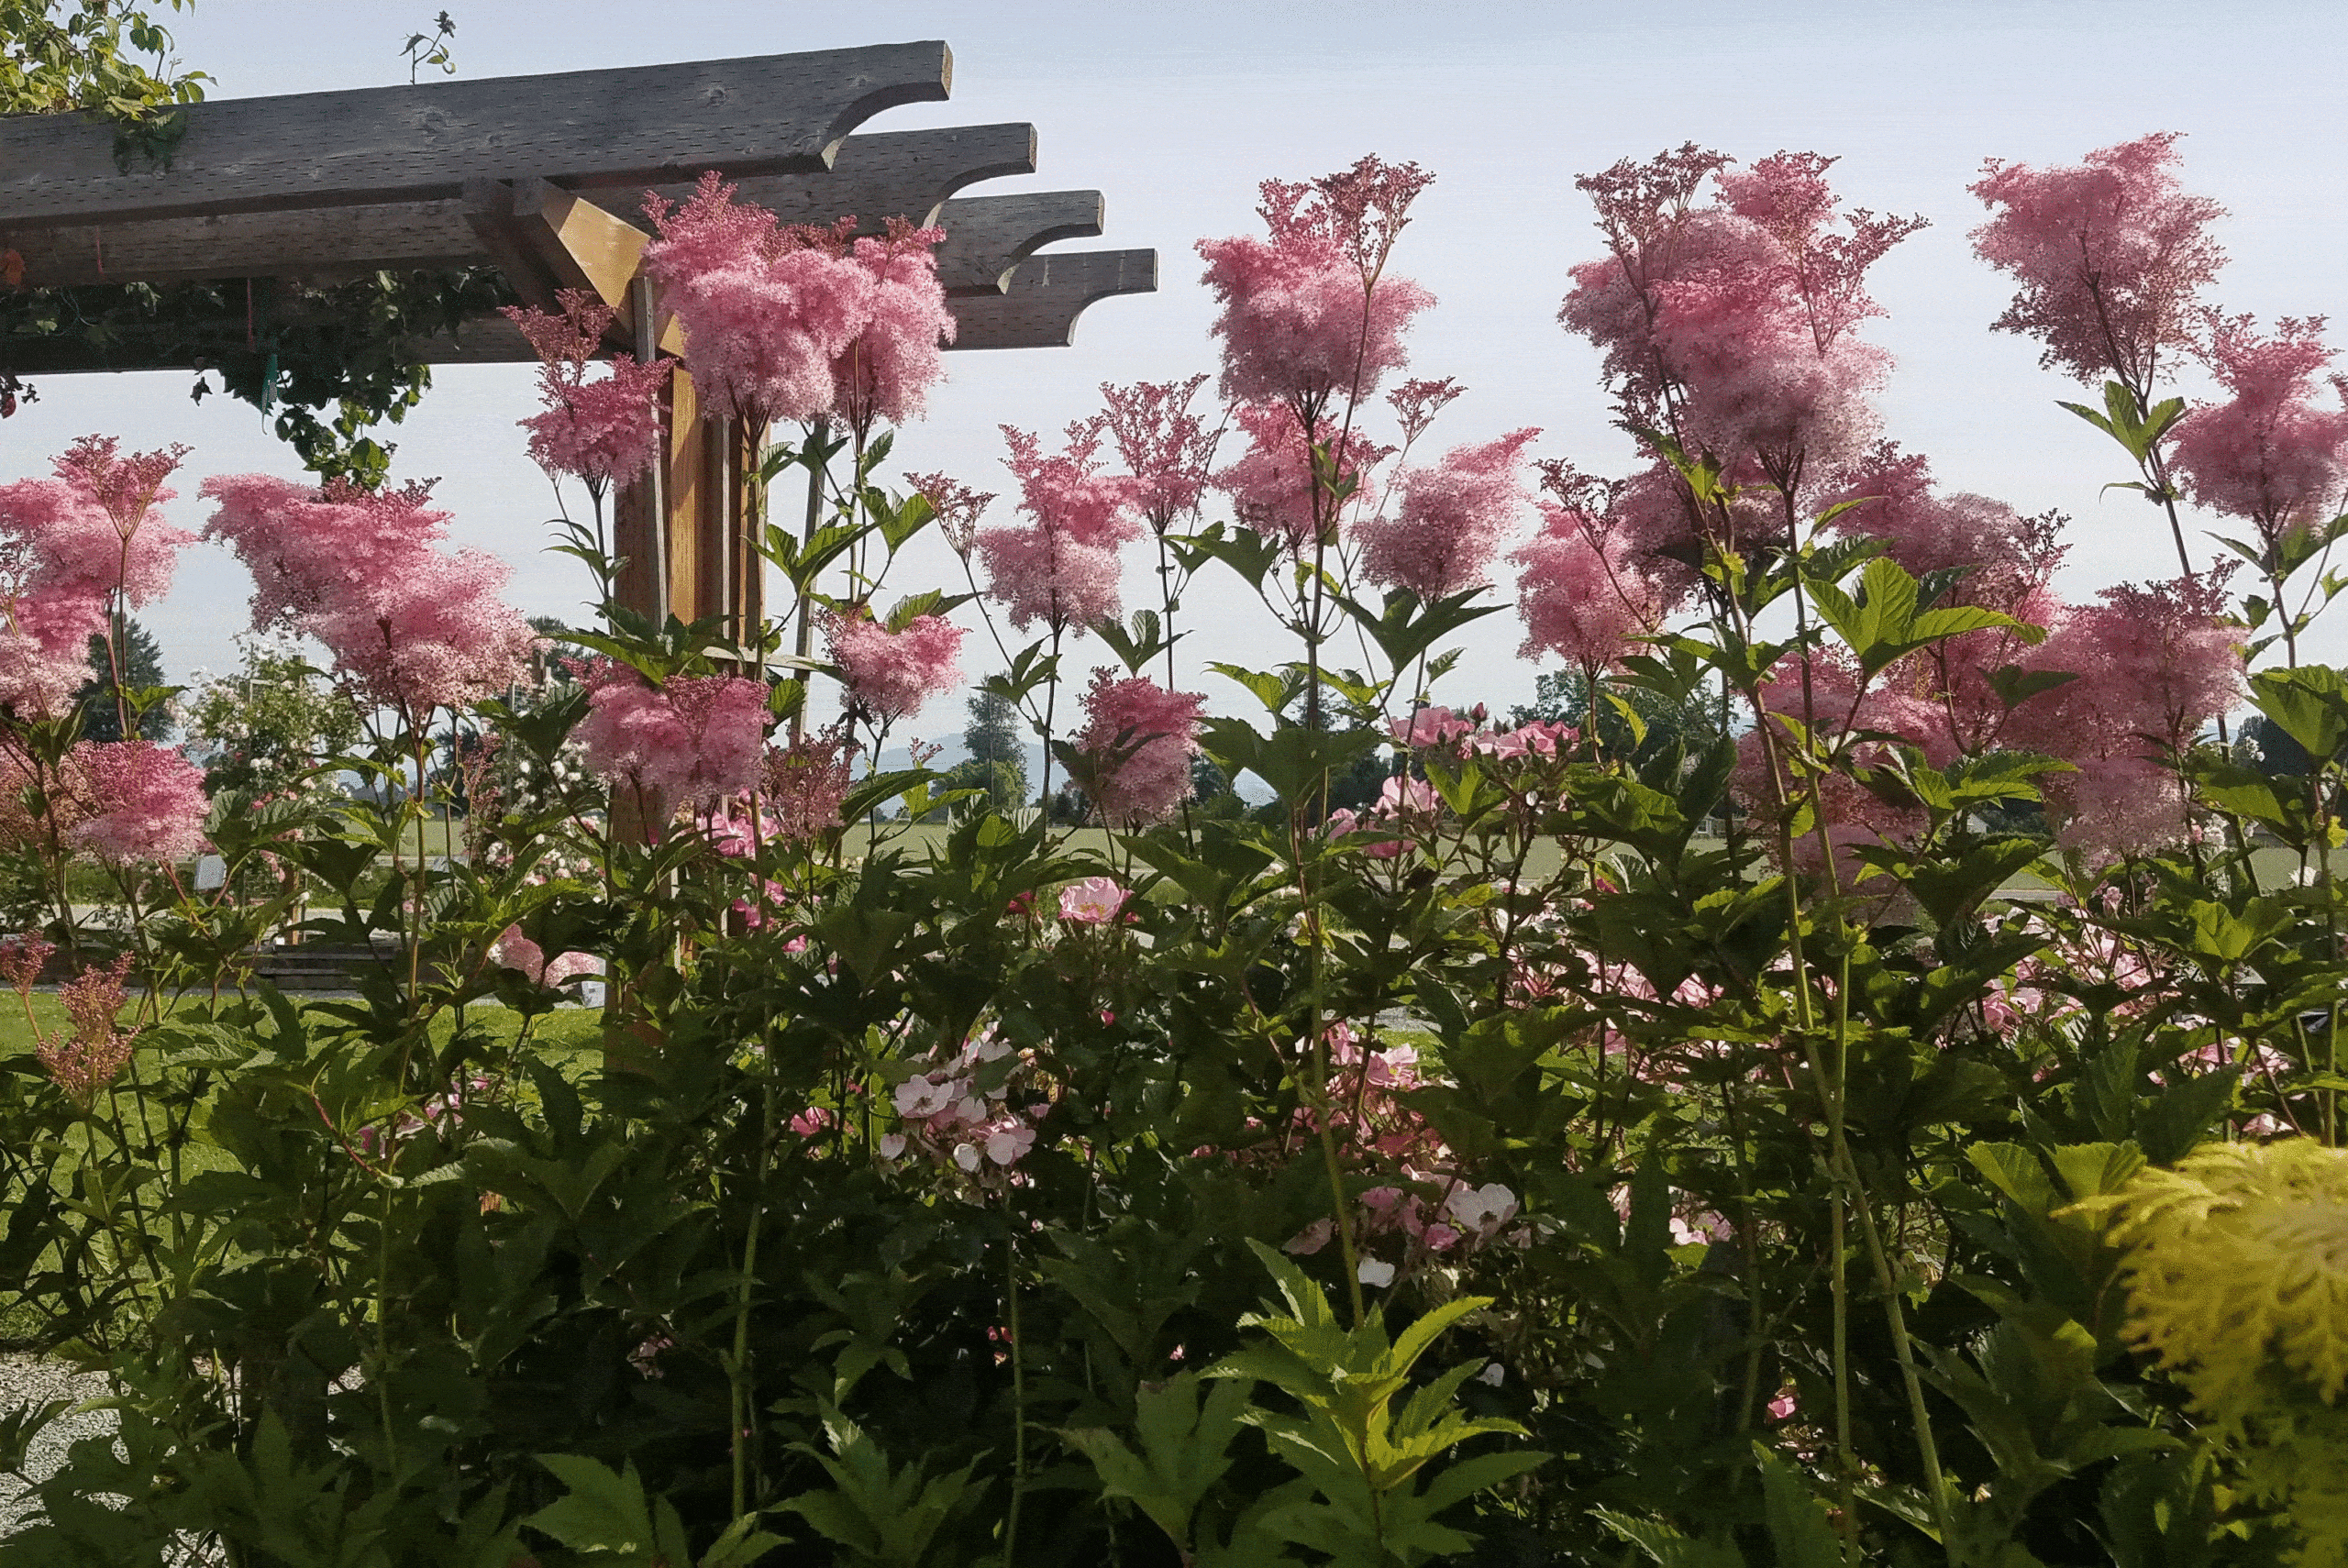 Filipendula rubra commonly known as Queen of the Prairie. This summer bloomer waves its sprays of small pink flowers.